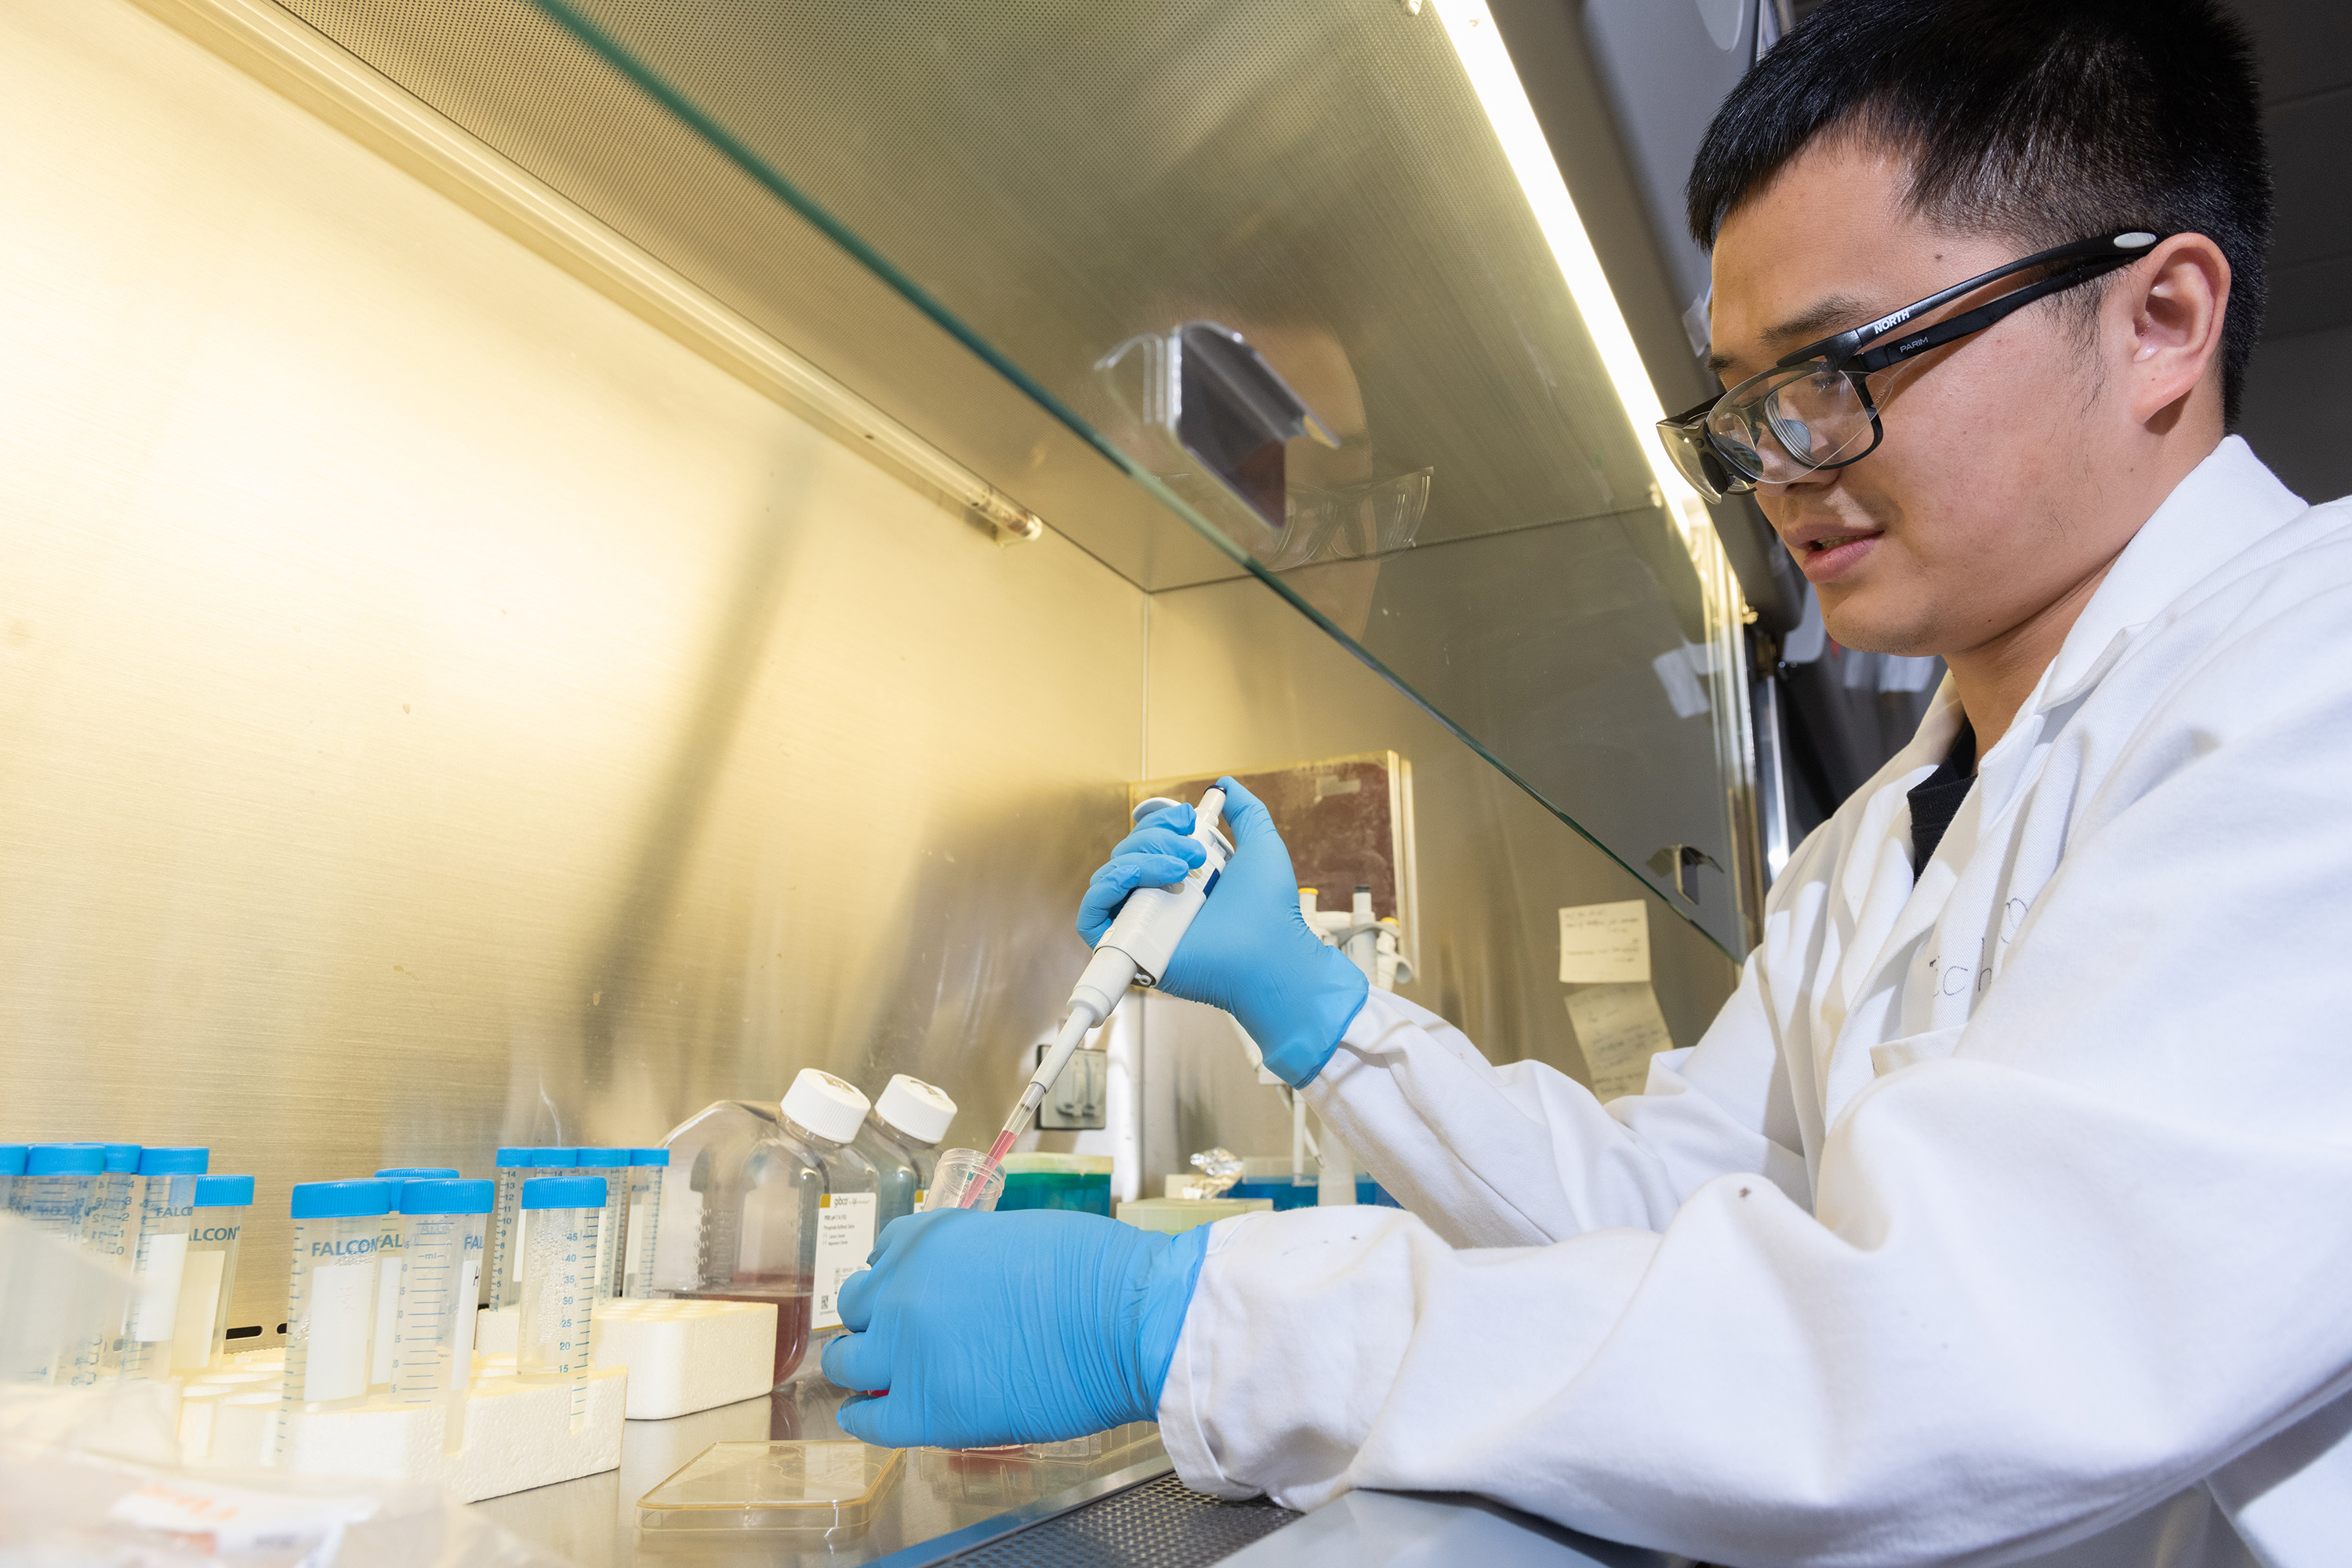 Jichuan Qiu, a postdoctoral fellow at Georgia Tech, researches how nanoscale materials could be used in medical treatments. (Credit: Allison Carter)